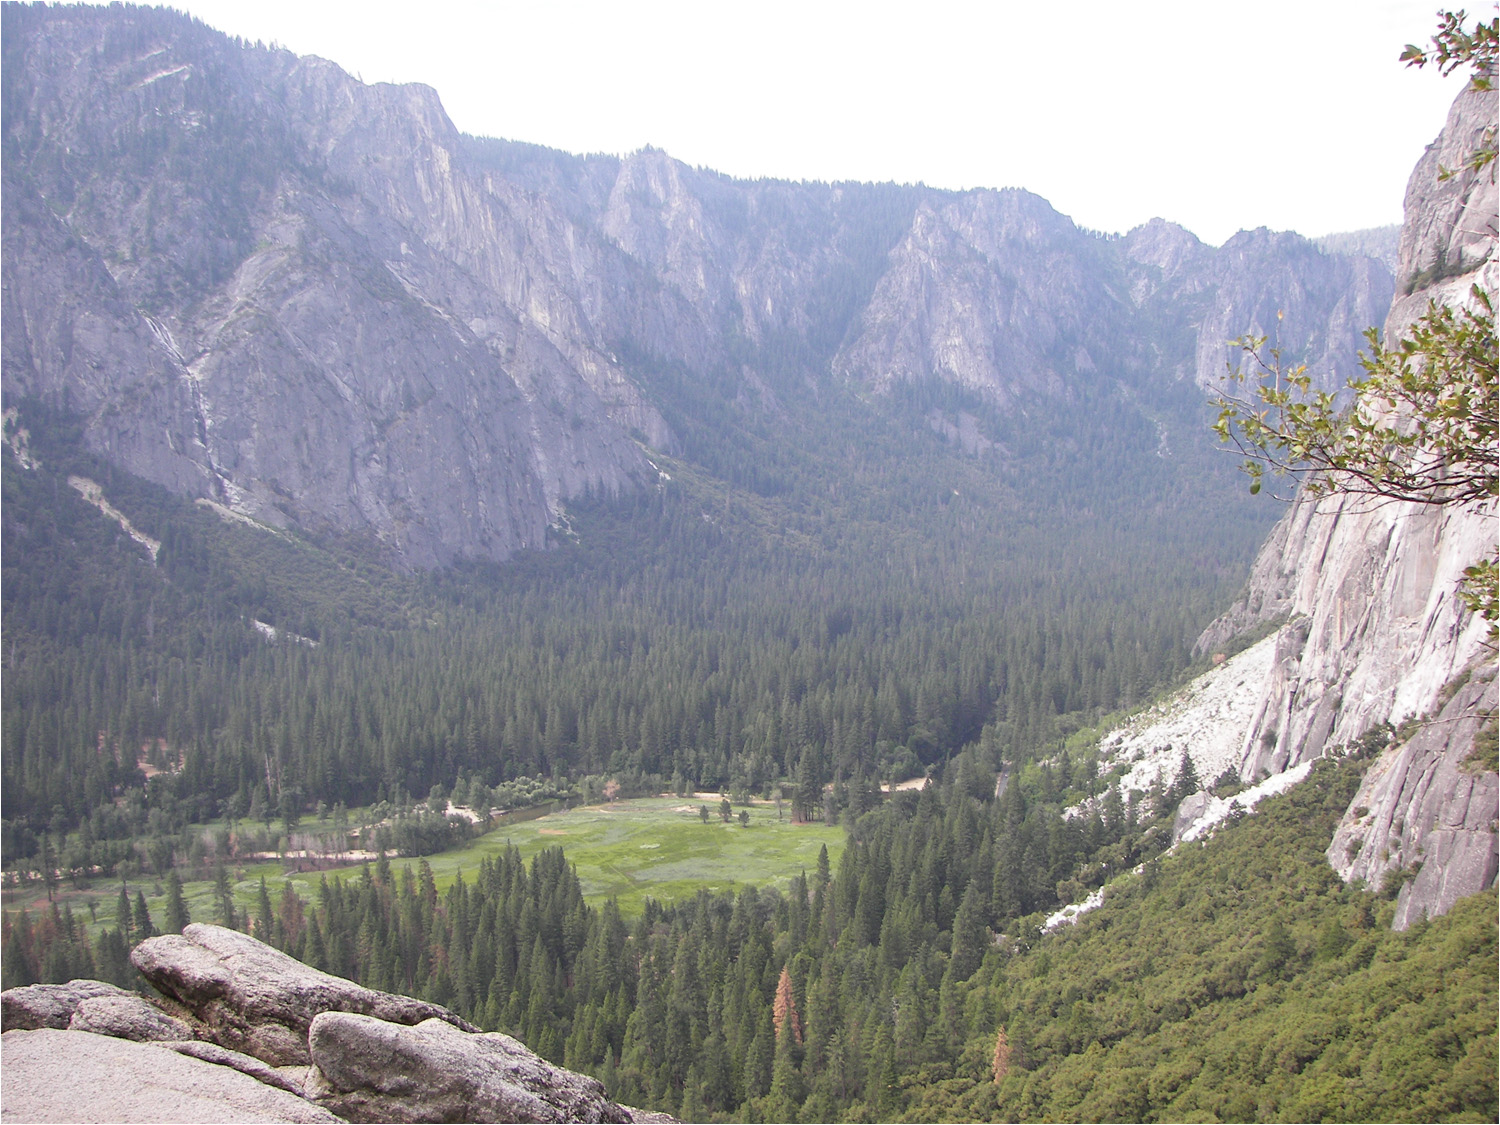 Upper Yosemite Falls Hike- View from trail about 1 hour into hike